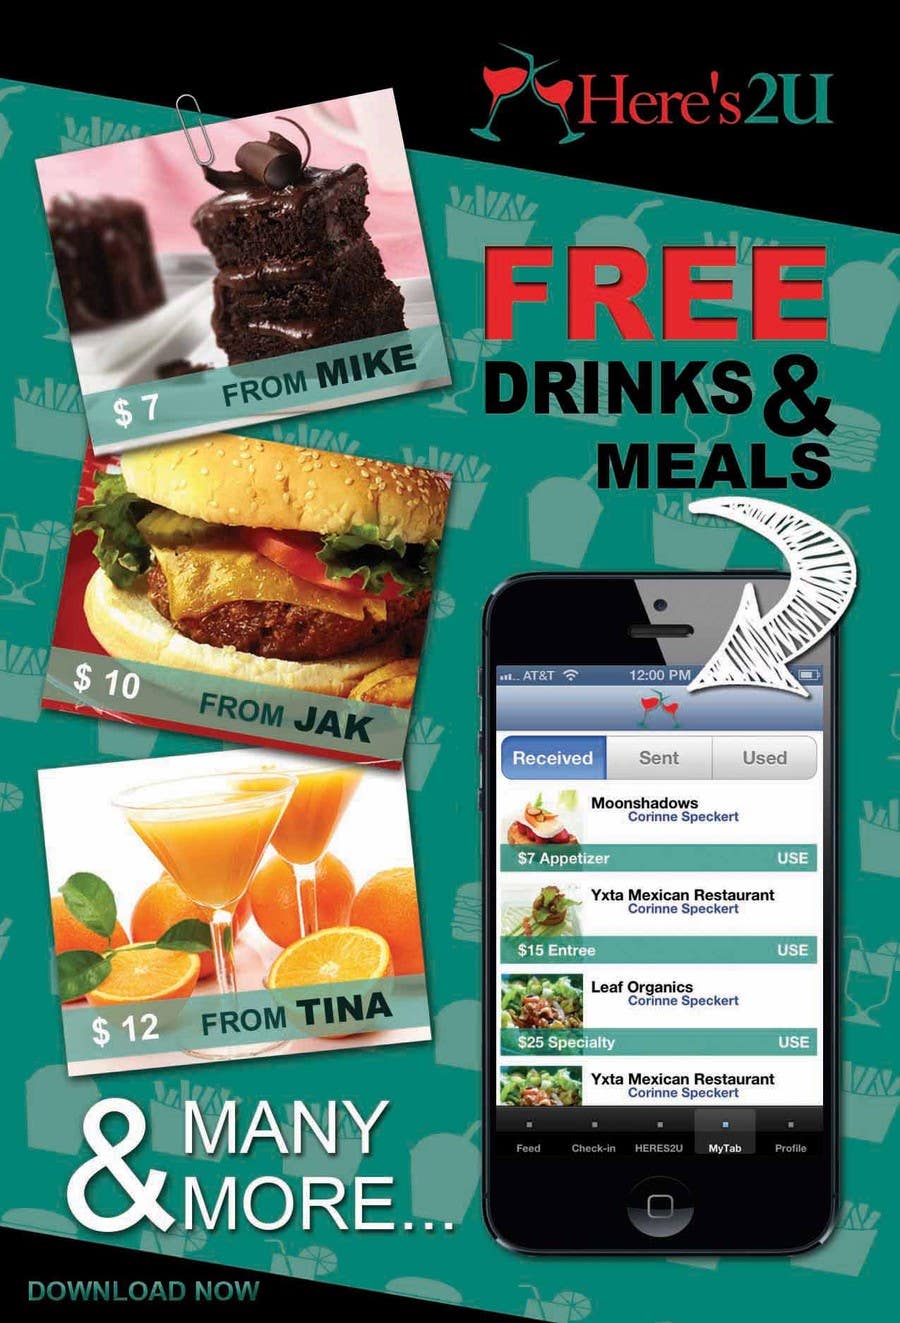 Bài tham dự cuộc thi #27 cho                                                 Design a In-store Restaurant Flyer for Mobile App.
                                            